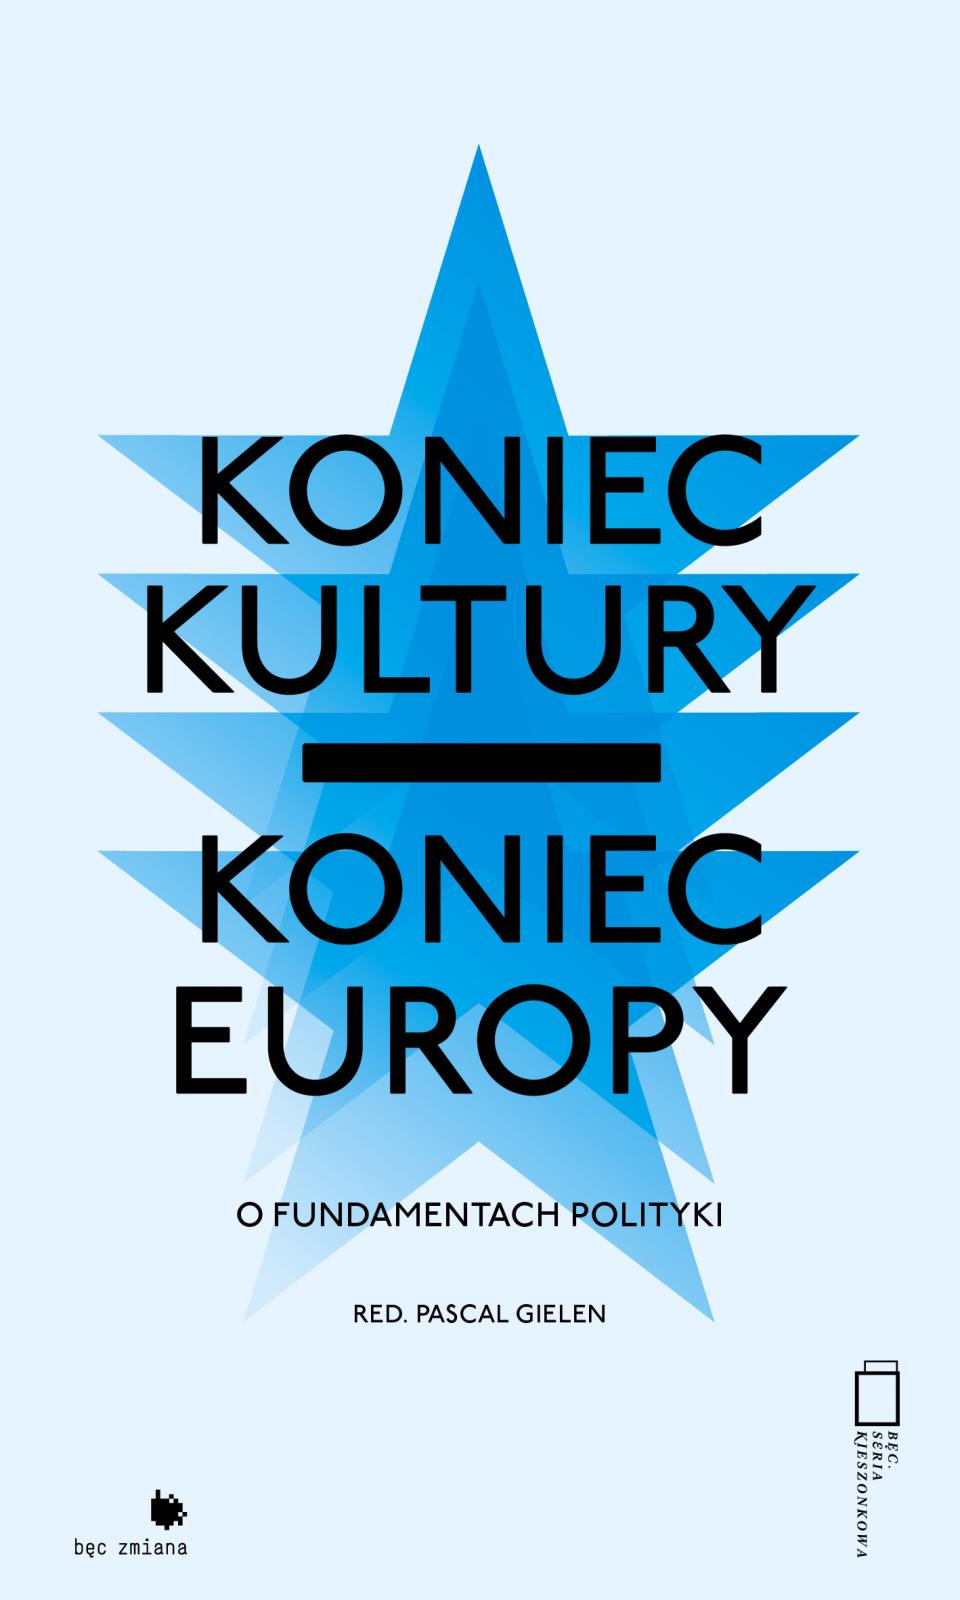 No Culture, No Europe: On the Foundations of Politics – Discussion